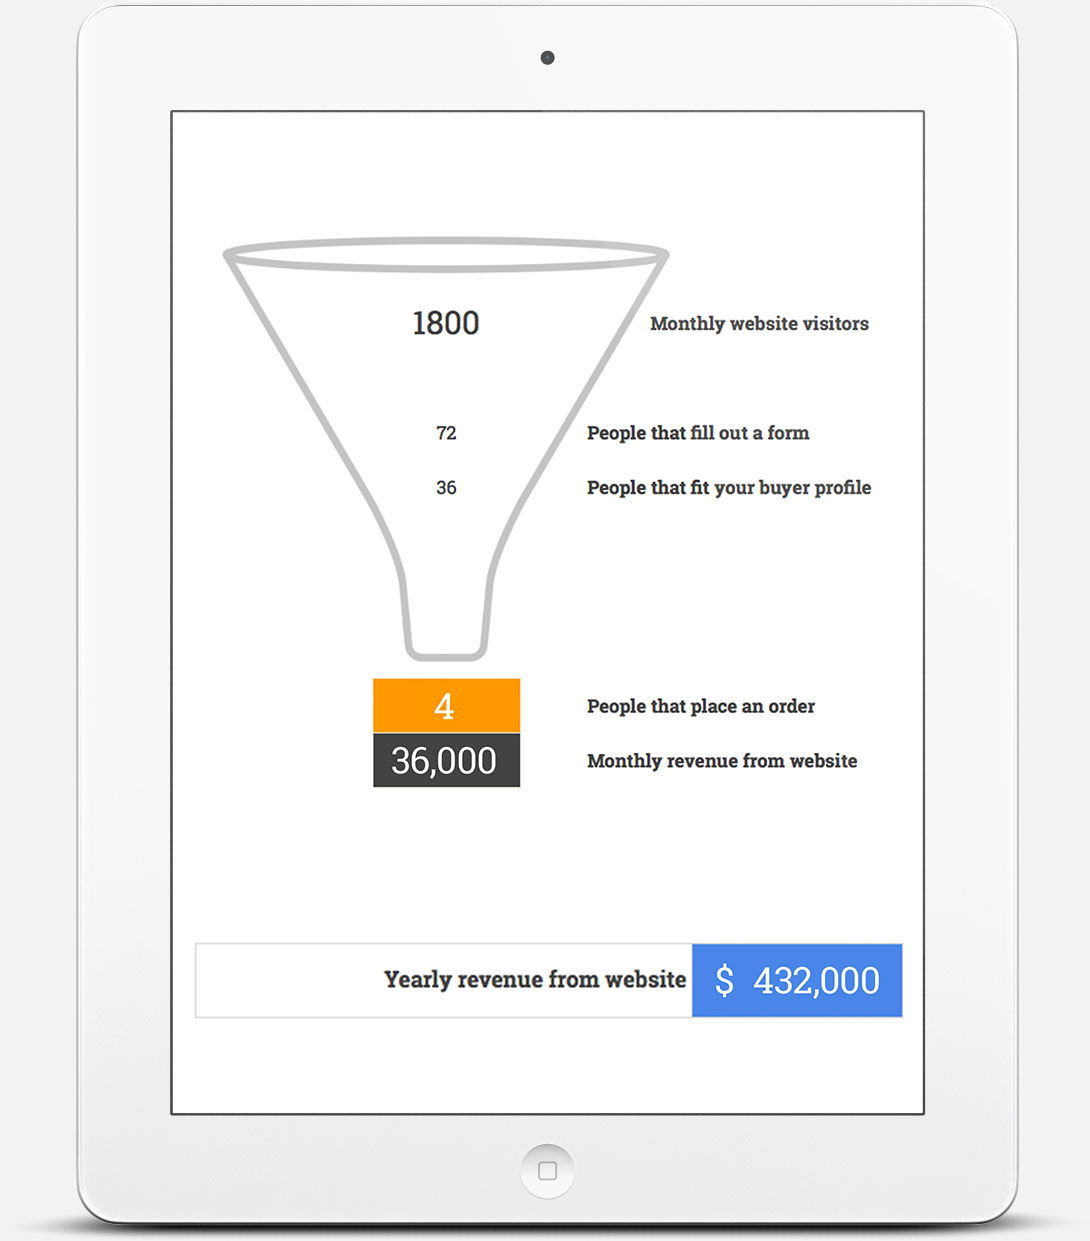 Tracking goals with a marketing funnel